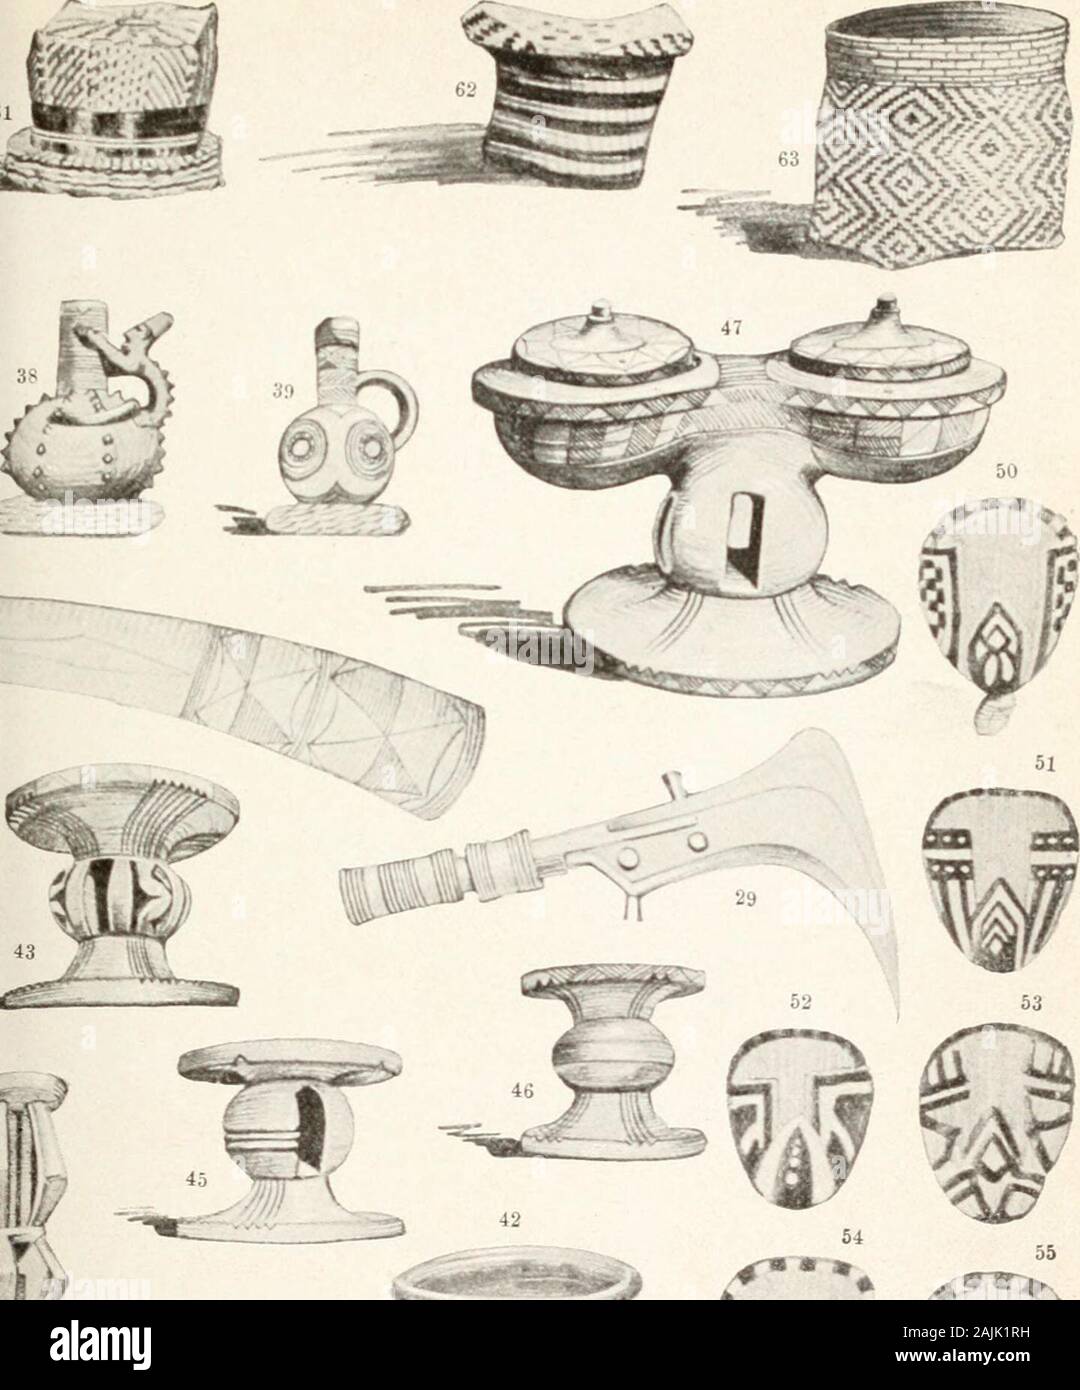 From the Congo to the Niger and the Nile : an account of The German Central African expedition of 1910-1911 . 29—71. Exam? 29—33. Sickles. 34—40. Bottles. 41, 42. Pottery. 43—46. Carved wood stools. 47—49. Wocc. Stock Photo